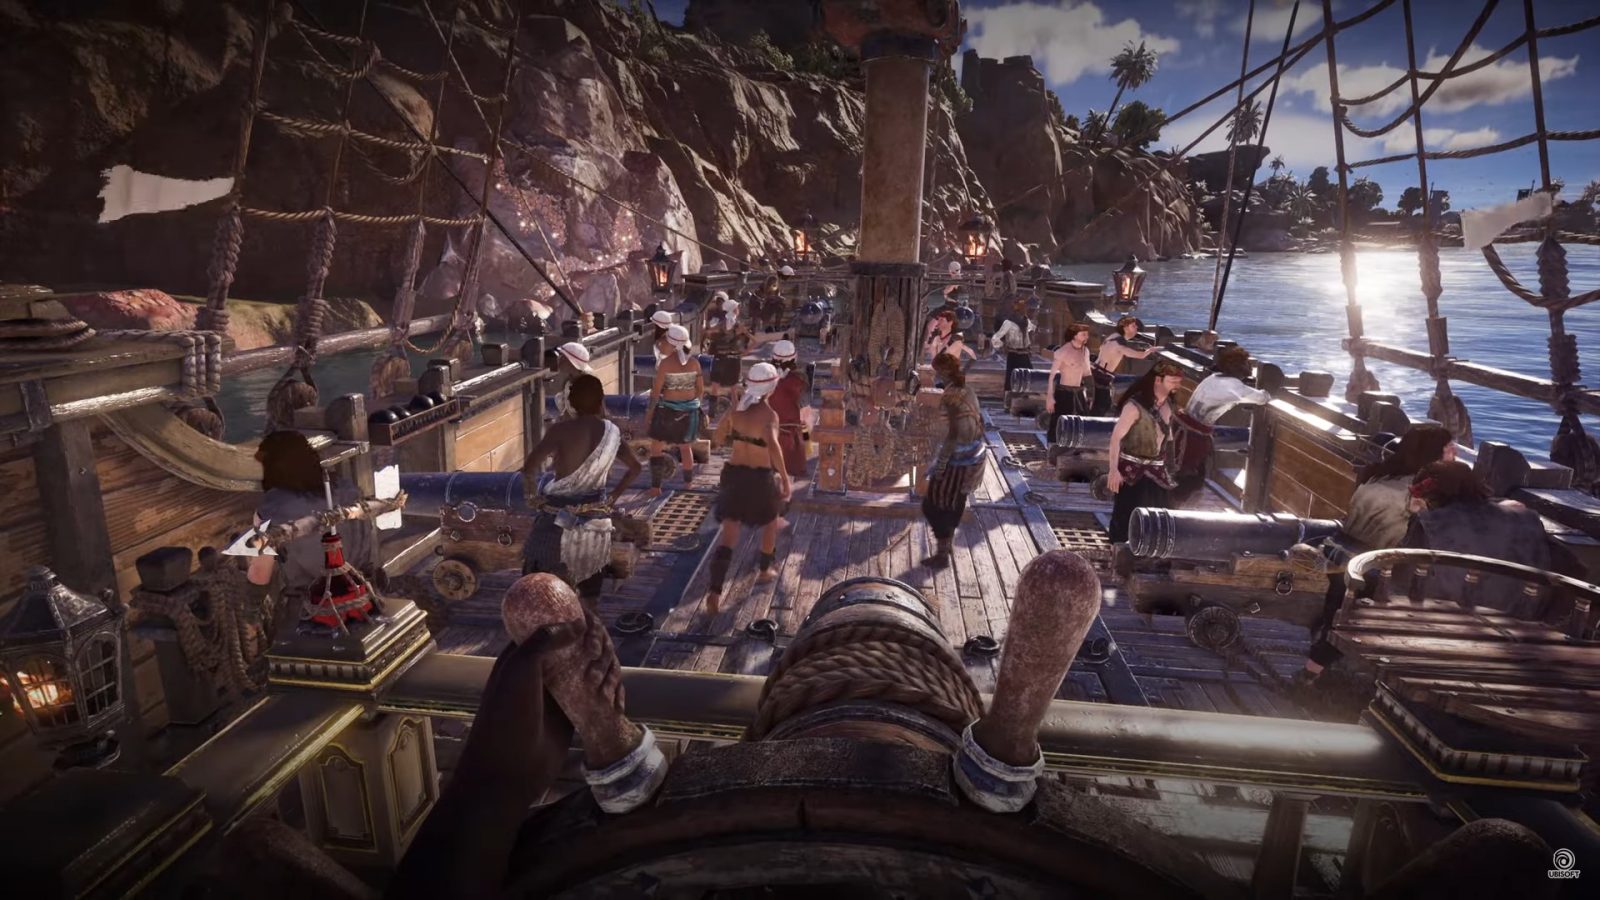 Skull and Bones, an world pirate multiplayer game, release in November - GAMING TREND